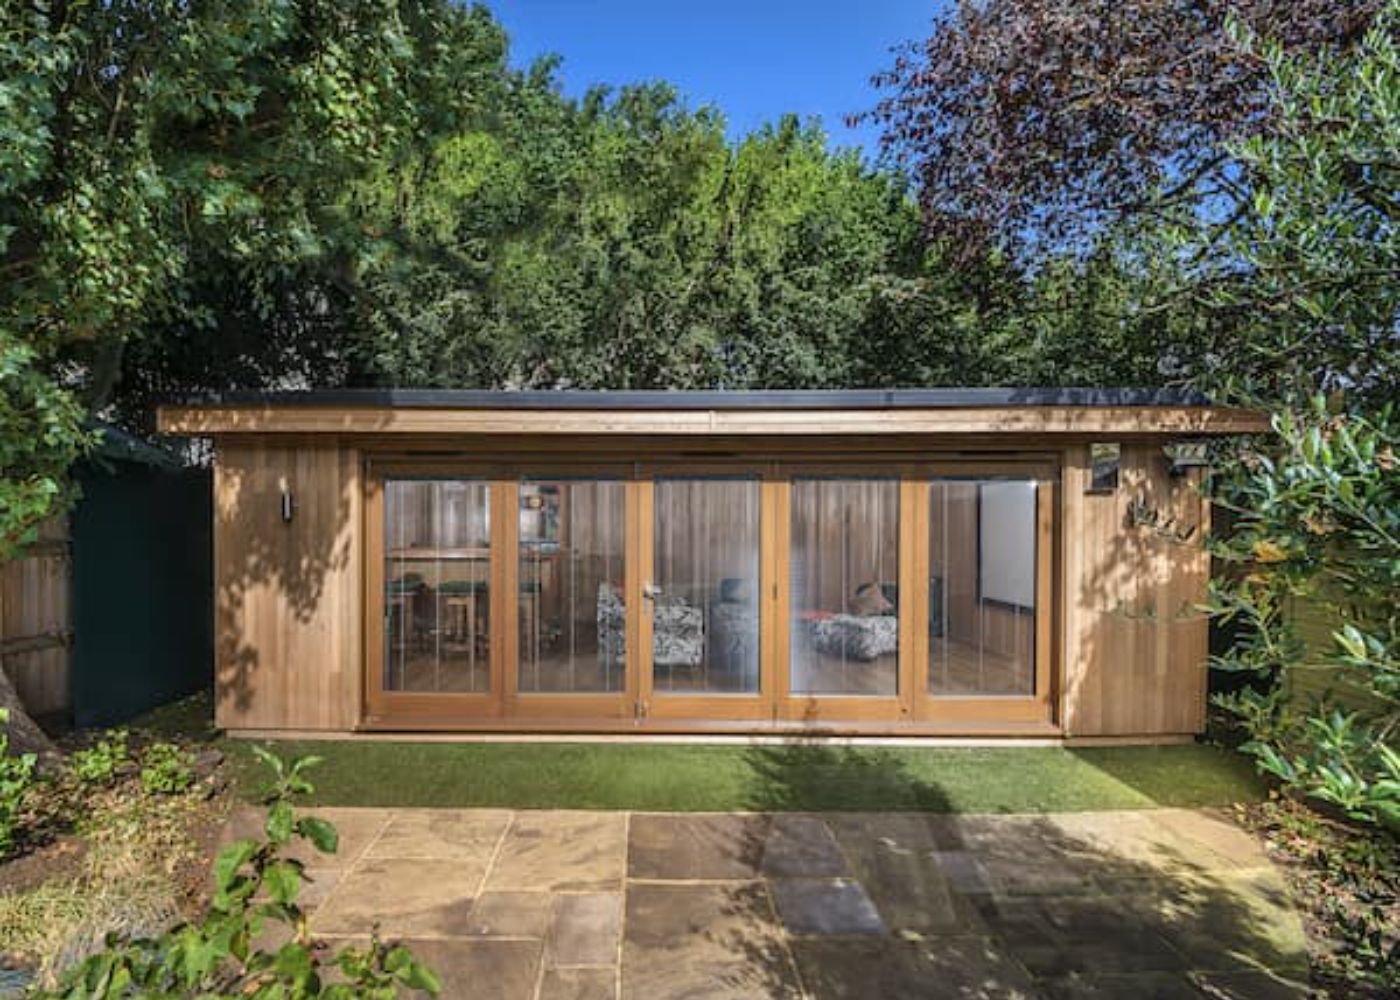 7m-x5m-with-Cedar-cladding-and-EPDM-roof (1)